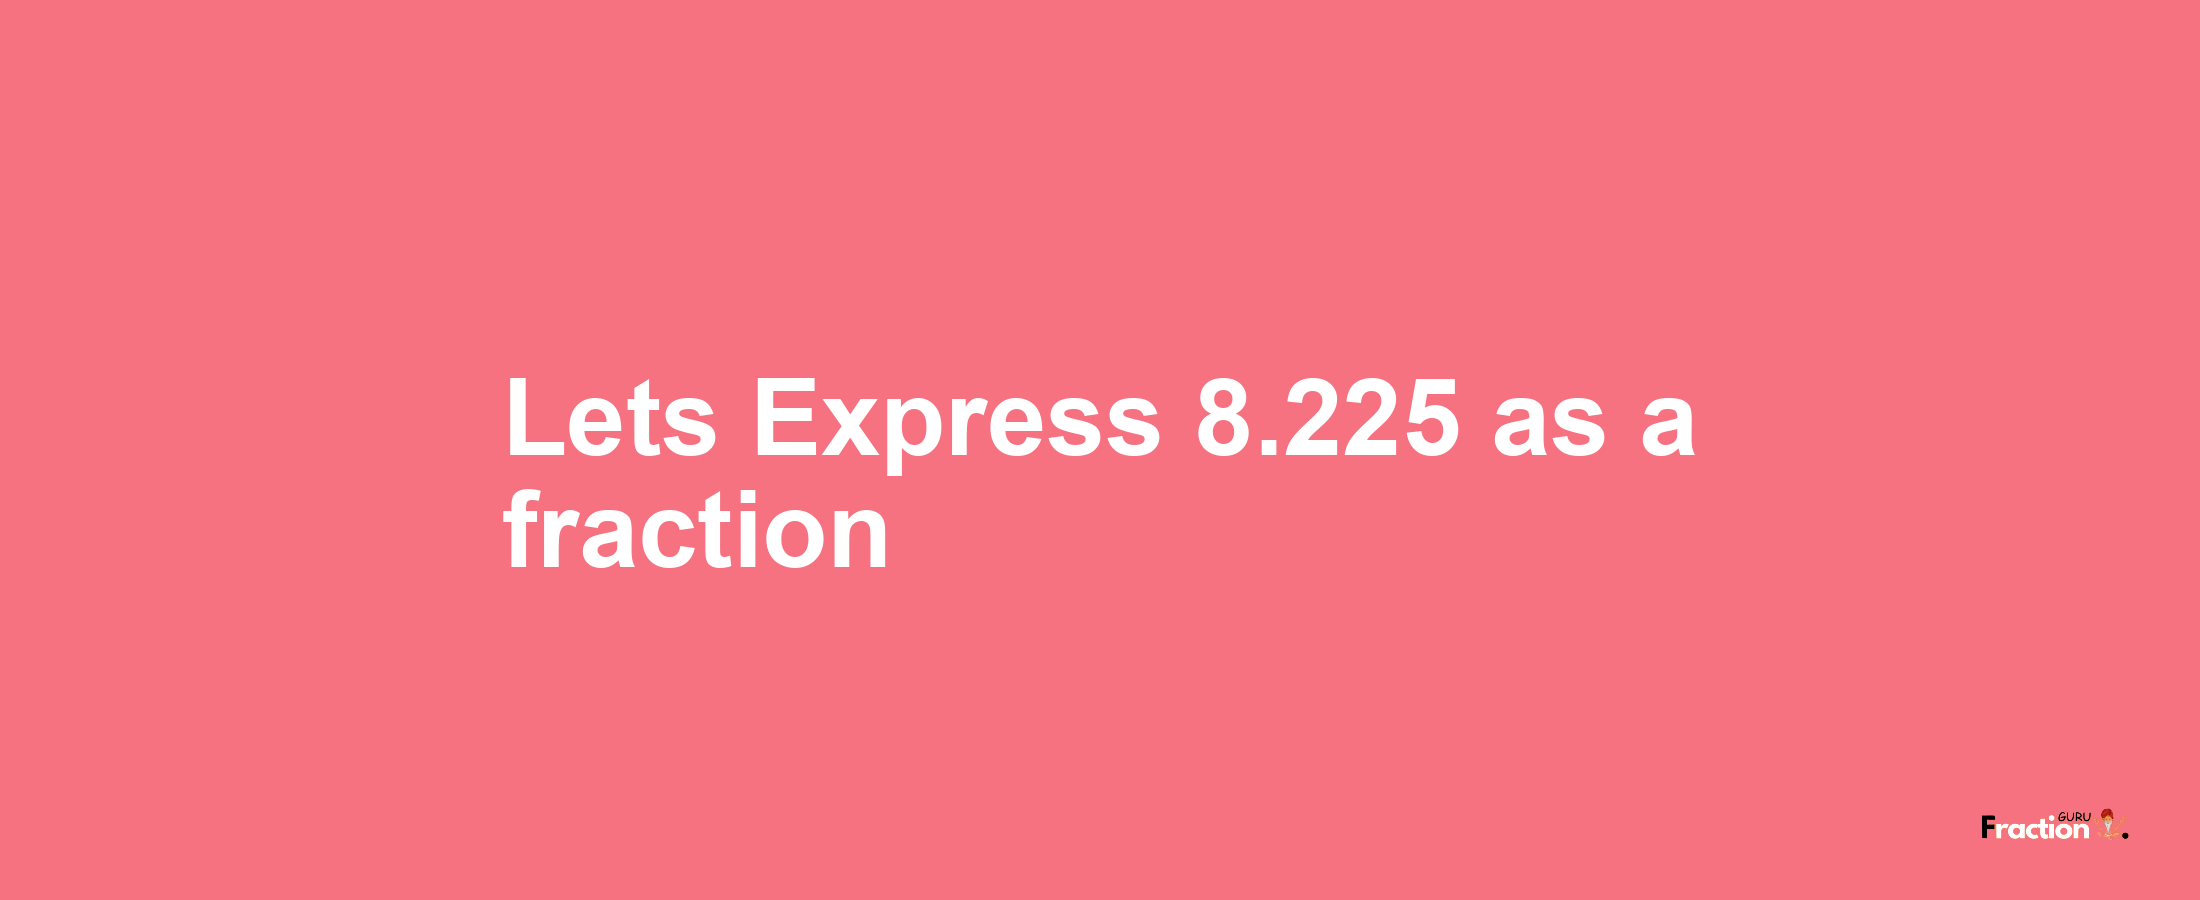 Lets Express 8.225 as afraction